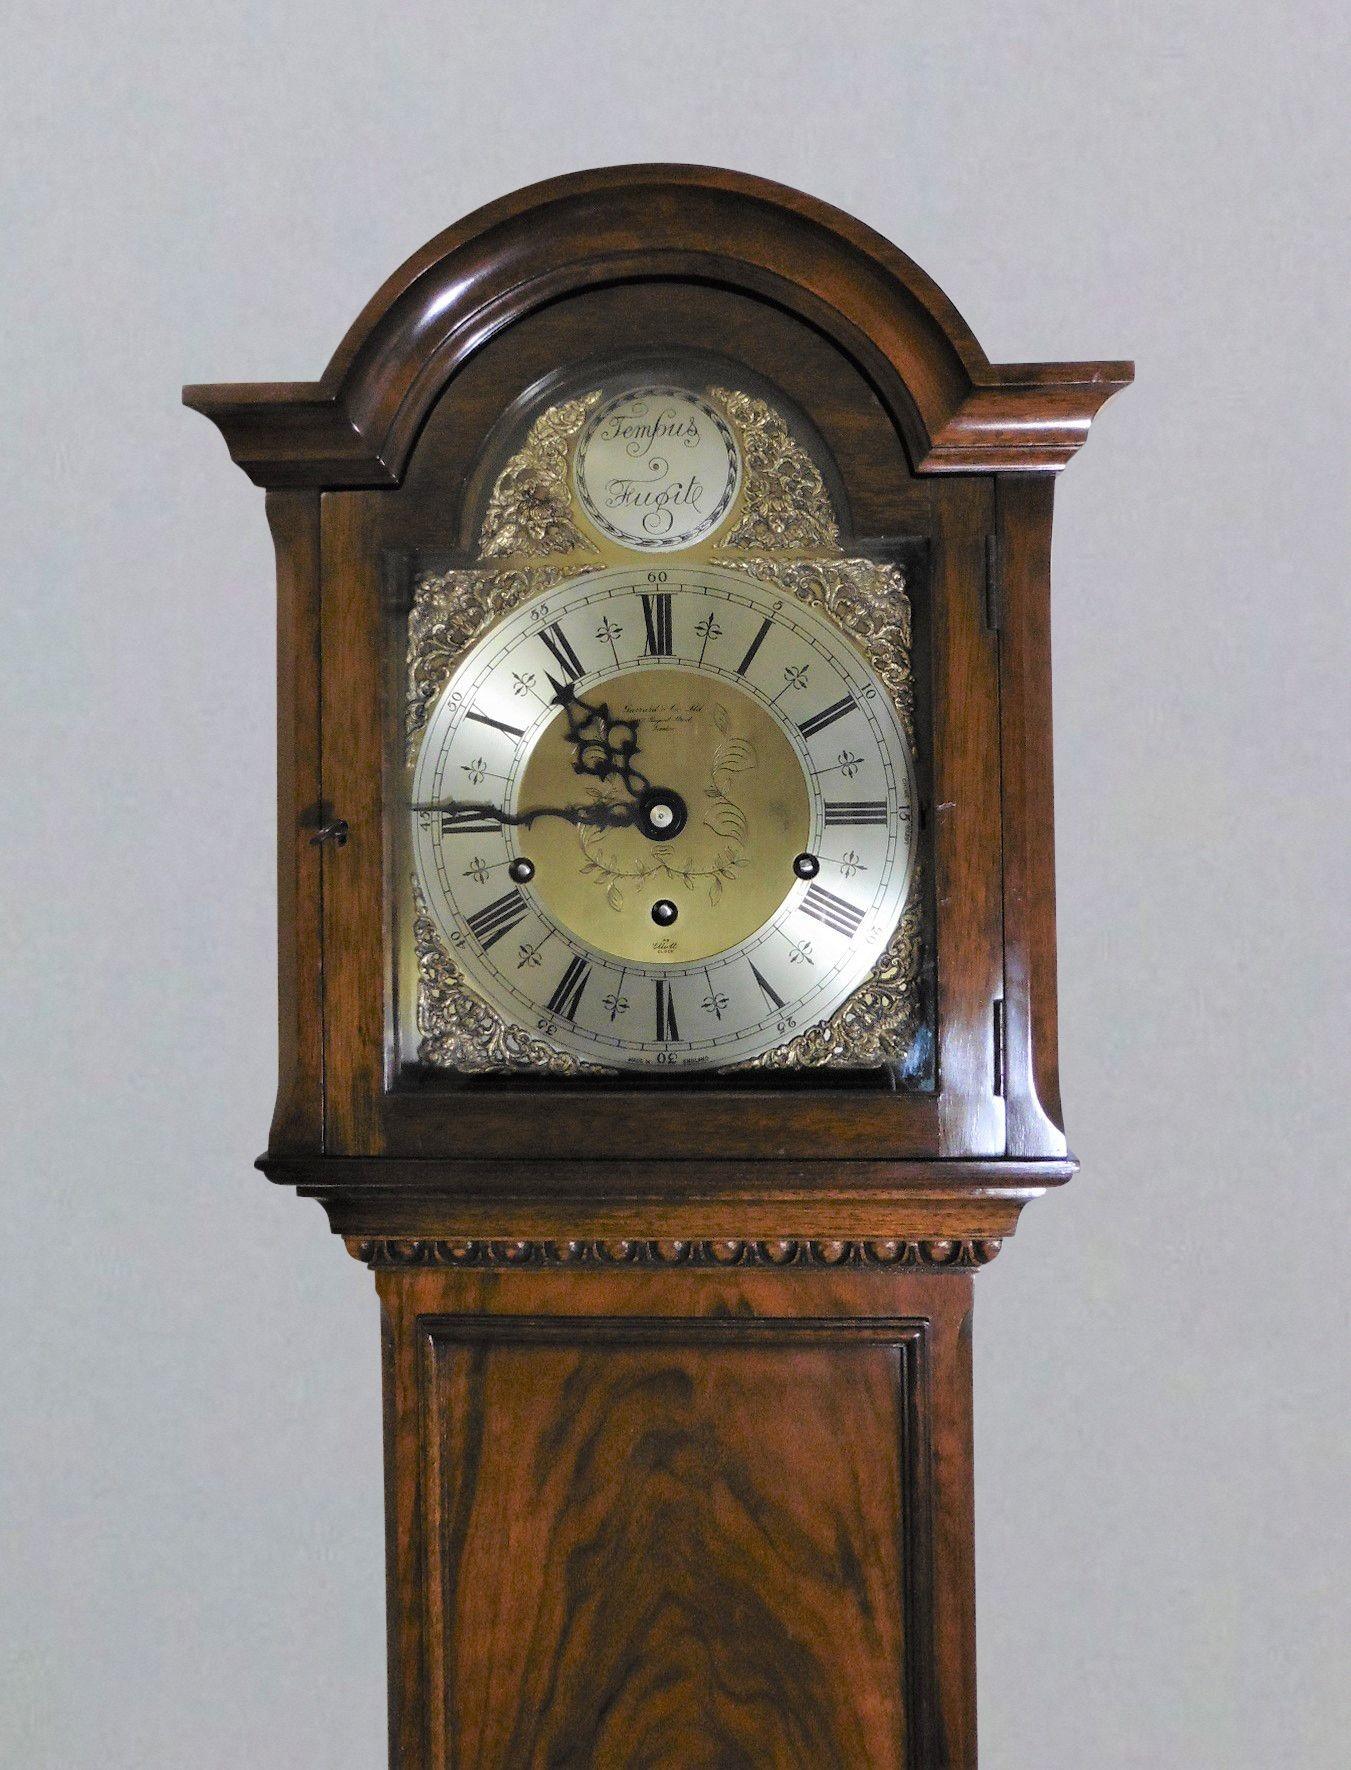 Walnut grandmother clock retailed by Garrards.

Walnut Longcase clock standing on a raised, shaped moulded plinth with applied panel to the base and carved acanthus leaf decoration.

Faux long trunk door with raised edging below the break arch